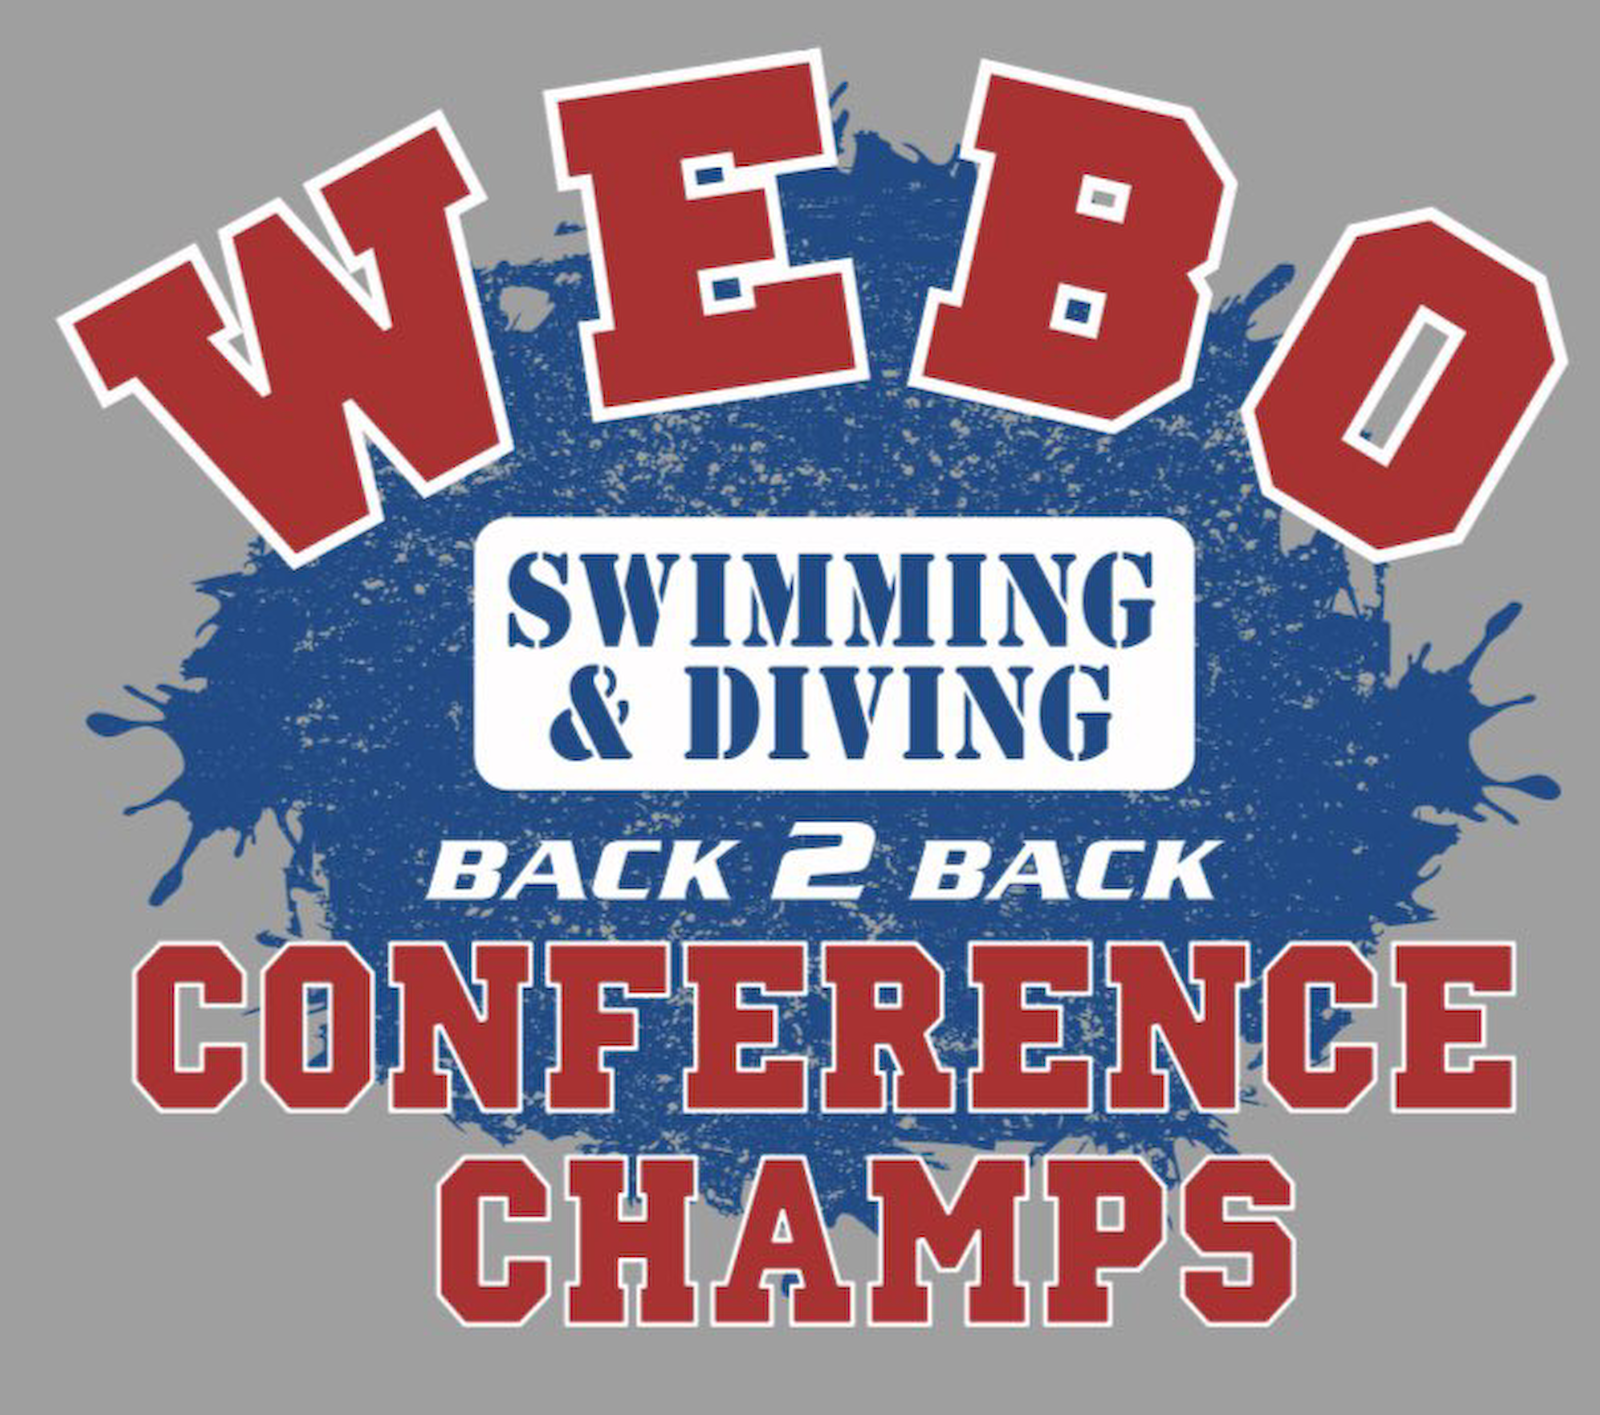 Swimming Conference Champs Shirt Logo.png